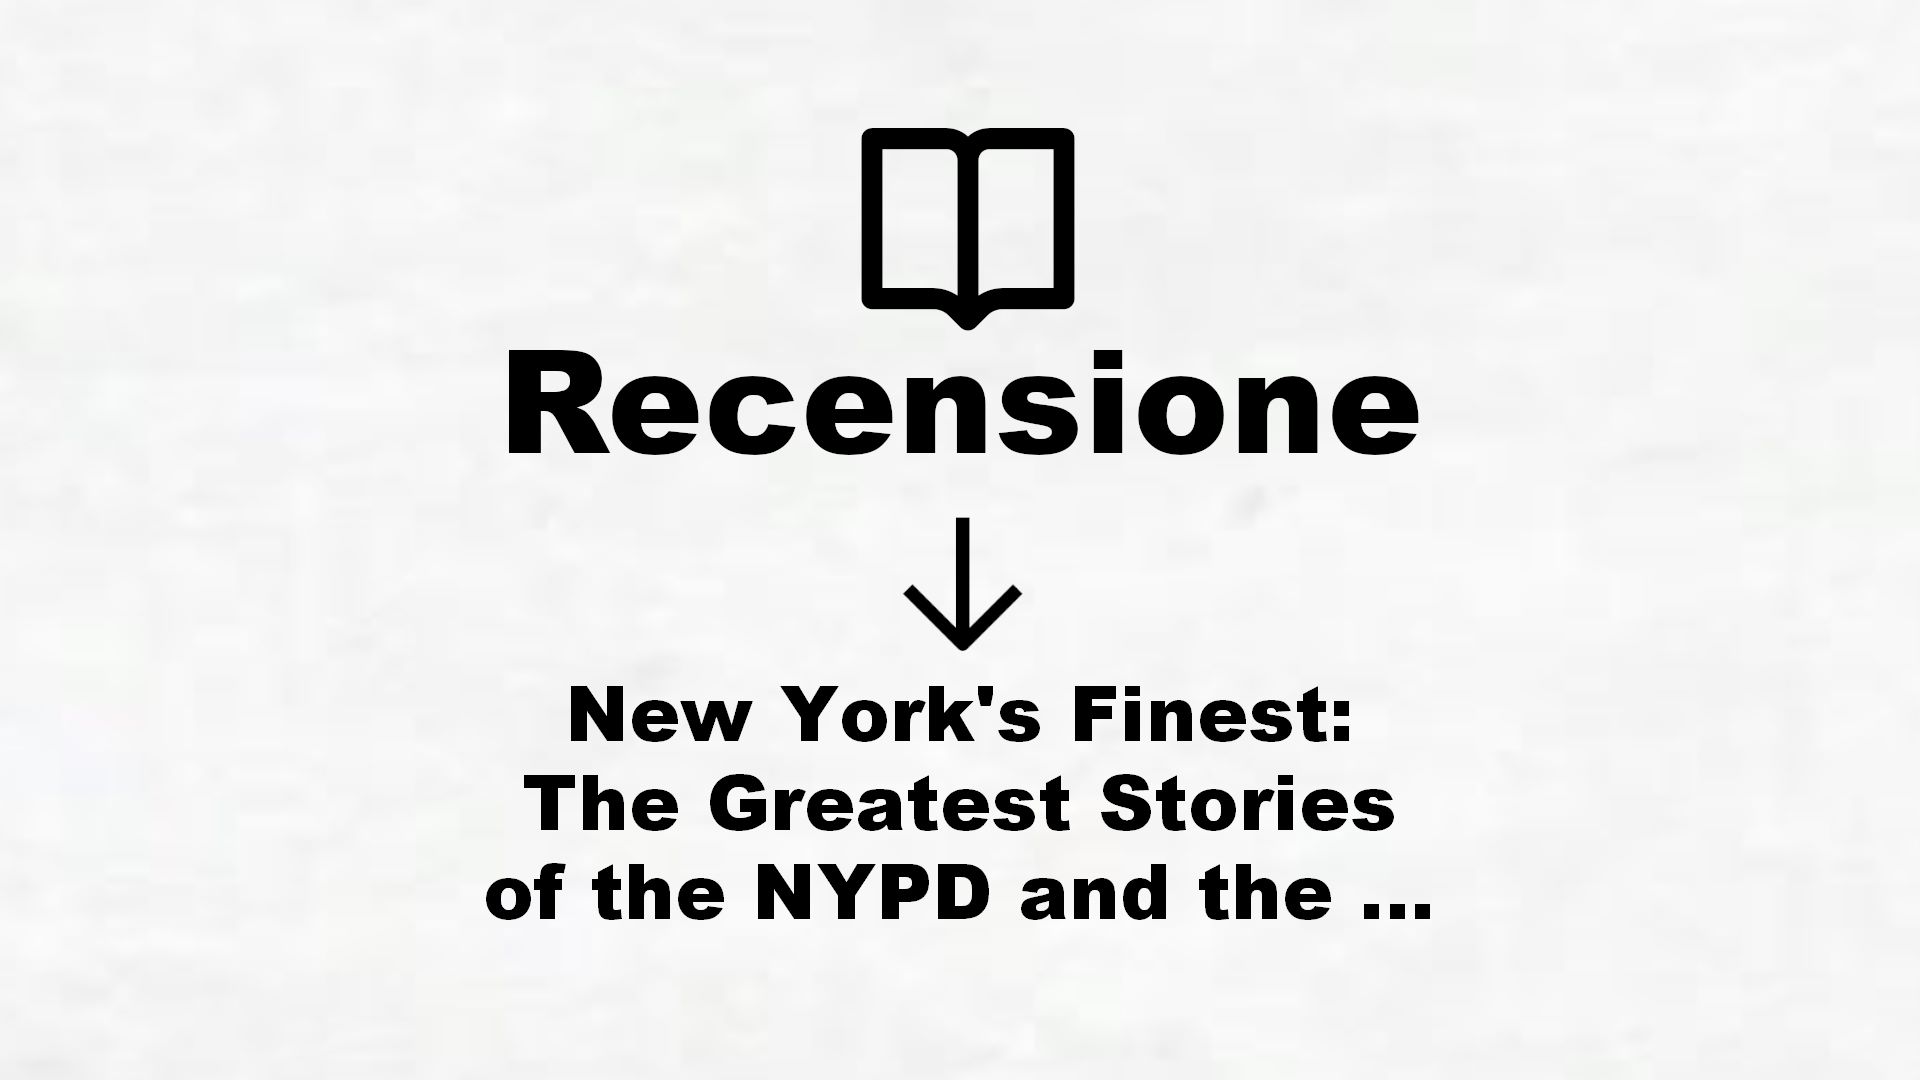 New York’s Finest: The Greatest Stories of the NYPD and the Hero Cops Who Save the City (English Edition) – Recensione Libro